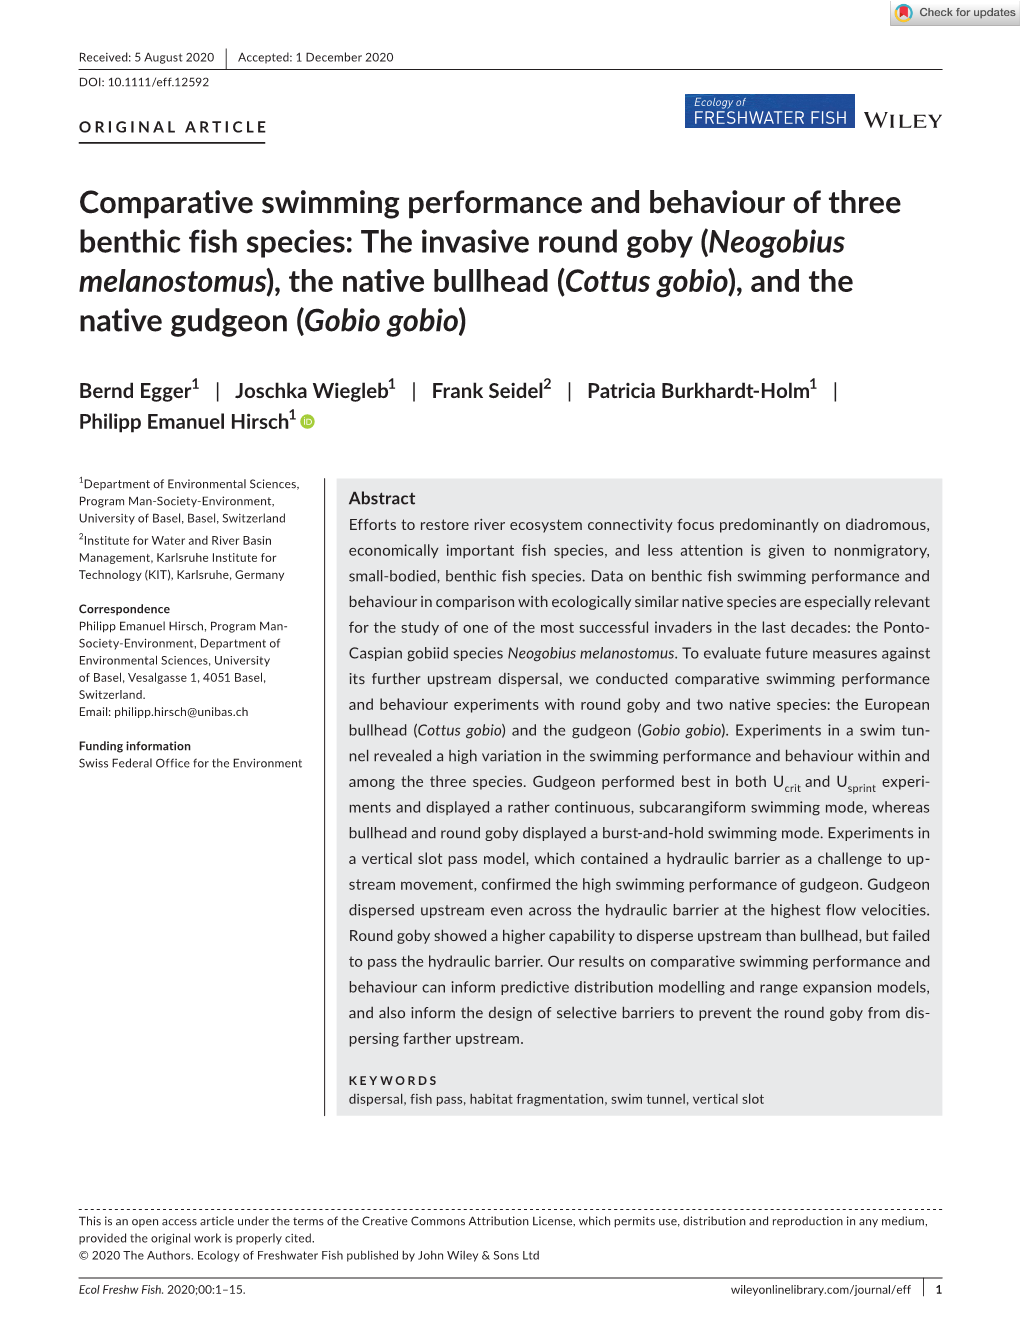 Comparative Swimming Performance and Behaviour of Three Benthic Fish